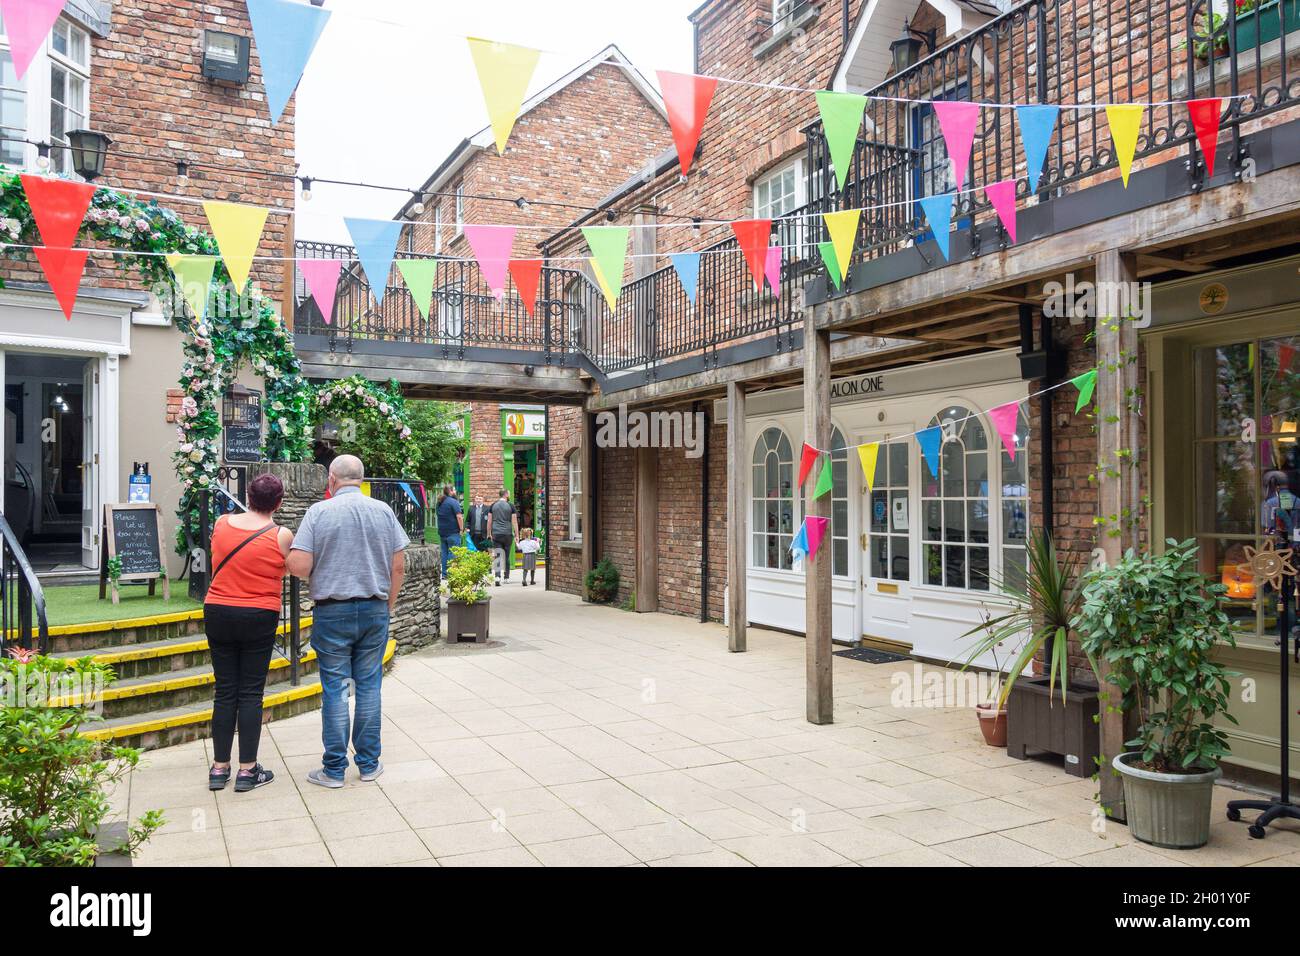 The Craft Village, Shipquay Street, Derry (Londonderry), County Derry, Northern Ireland, United Kingdom Stock Photo